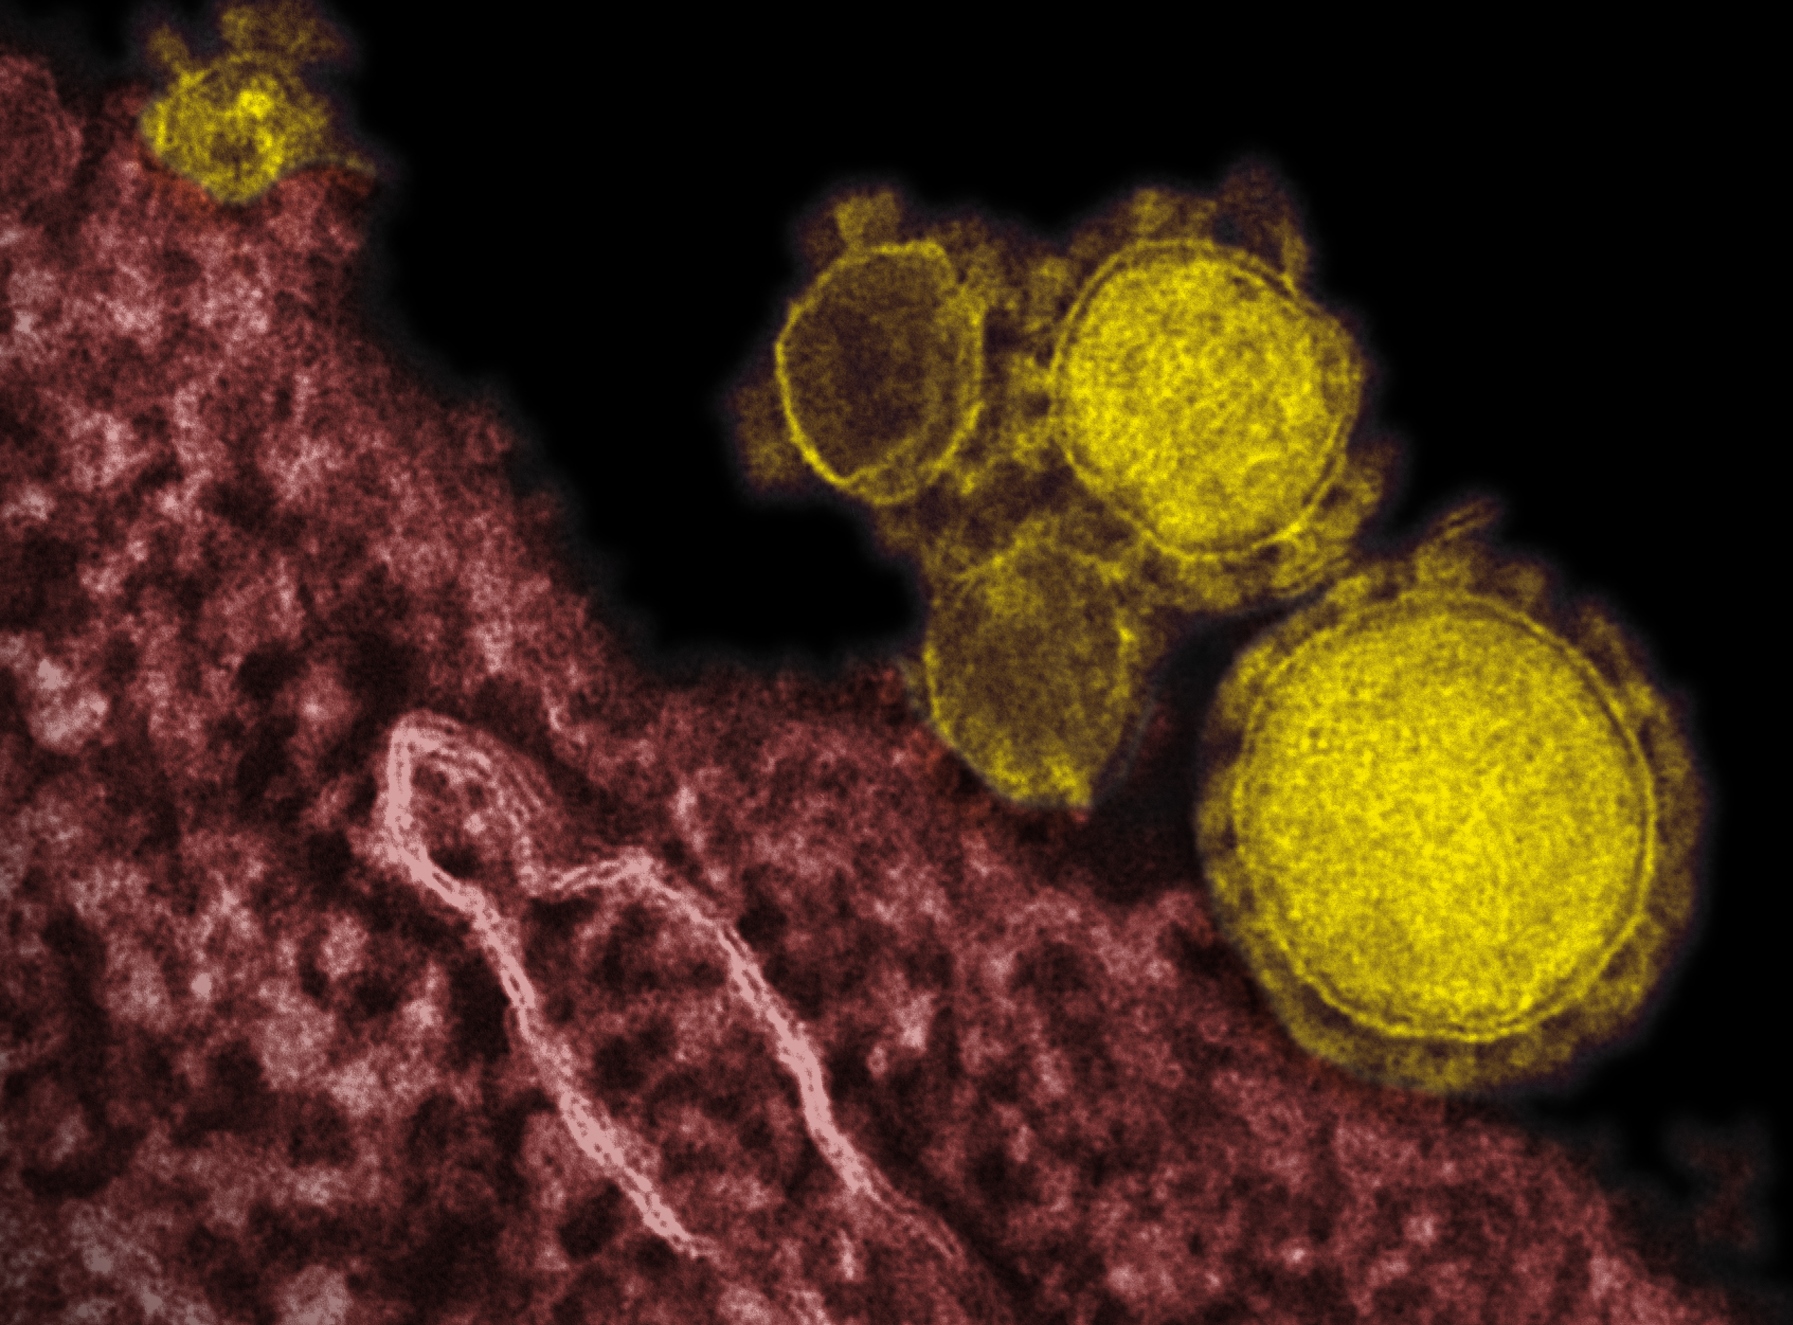 Solving Another MERS Mystery